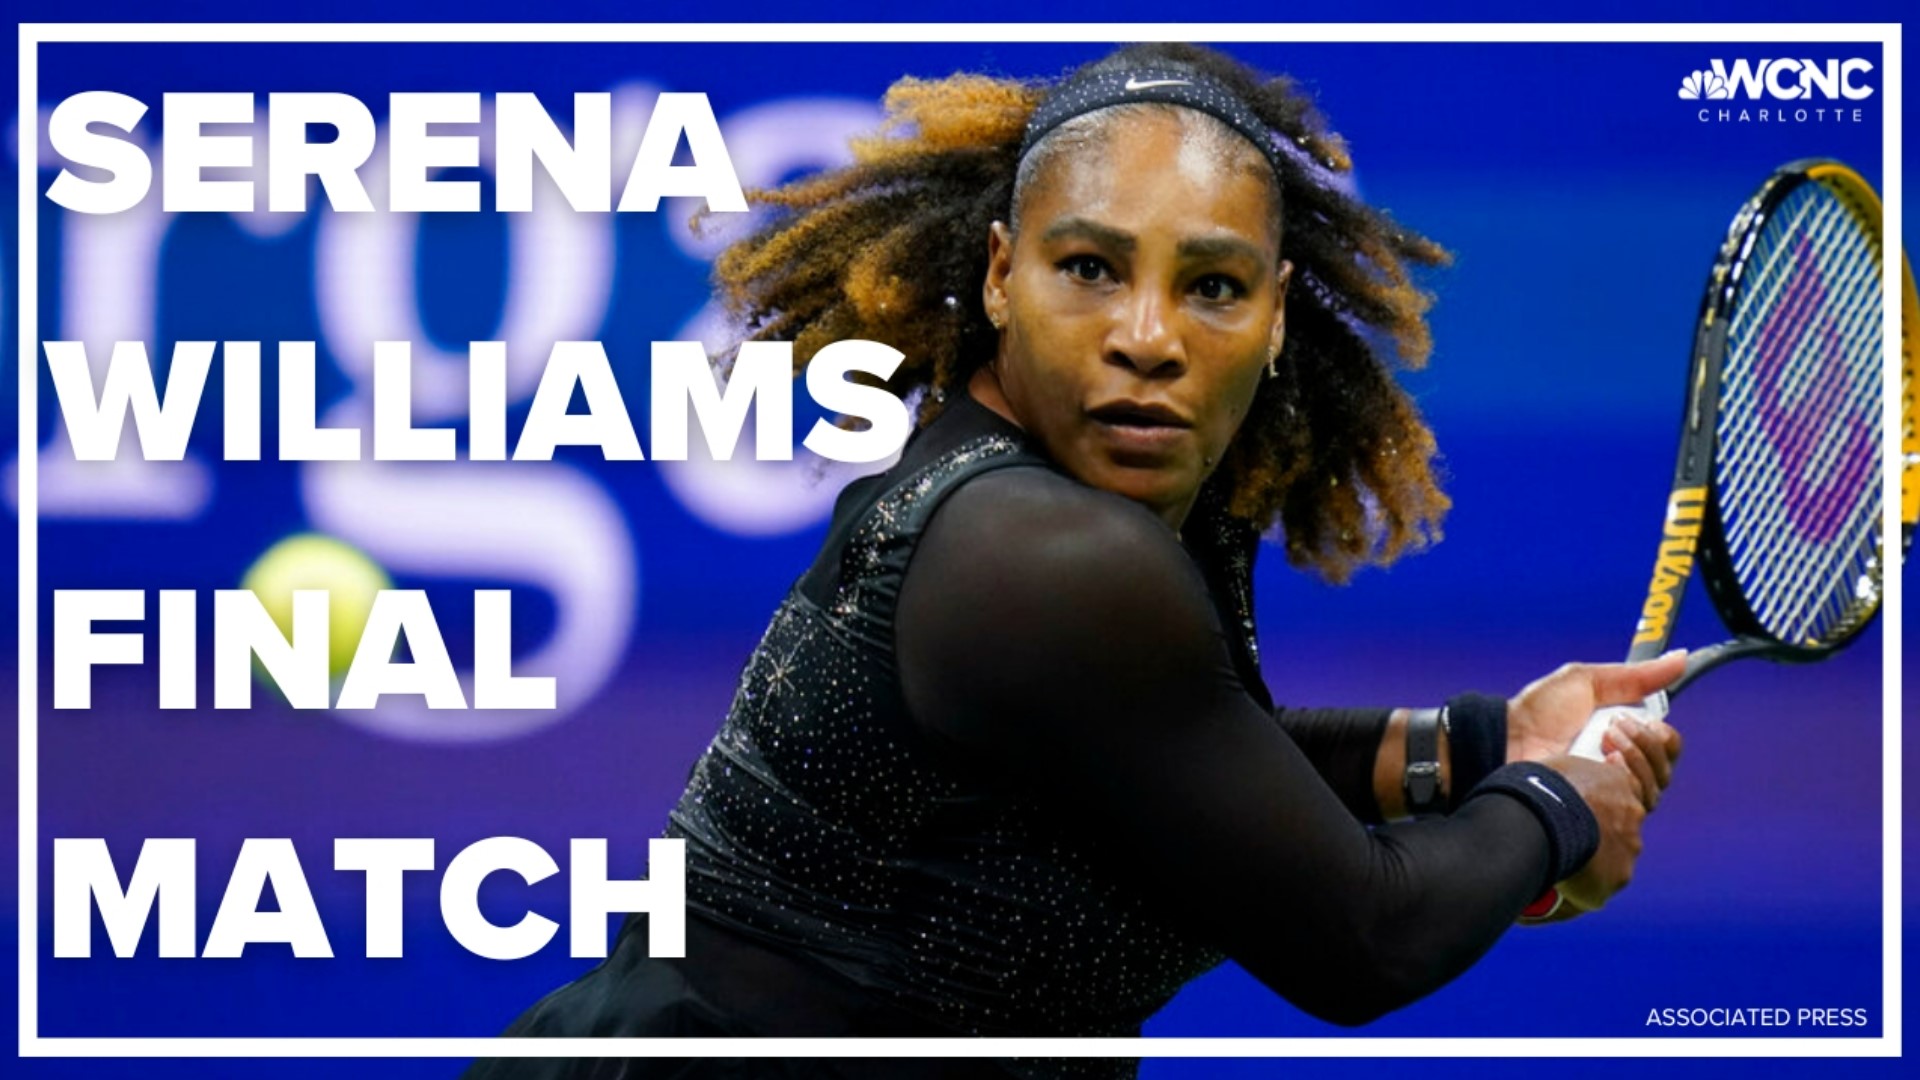 Did Serena Williams win at the US Open? wcnc